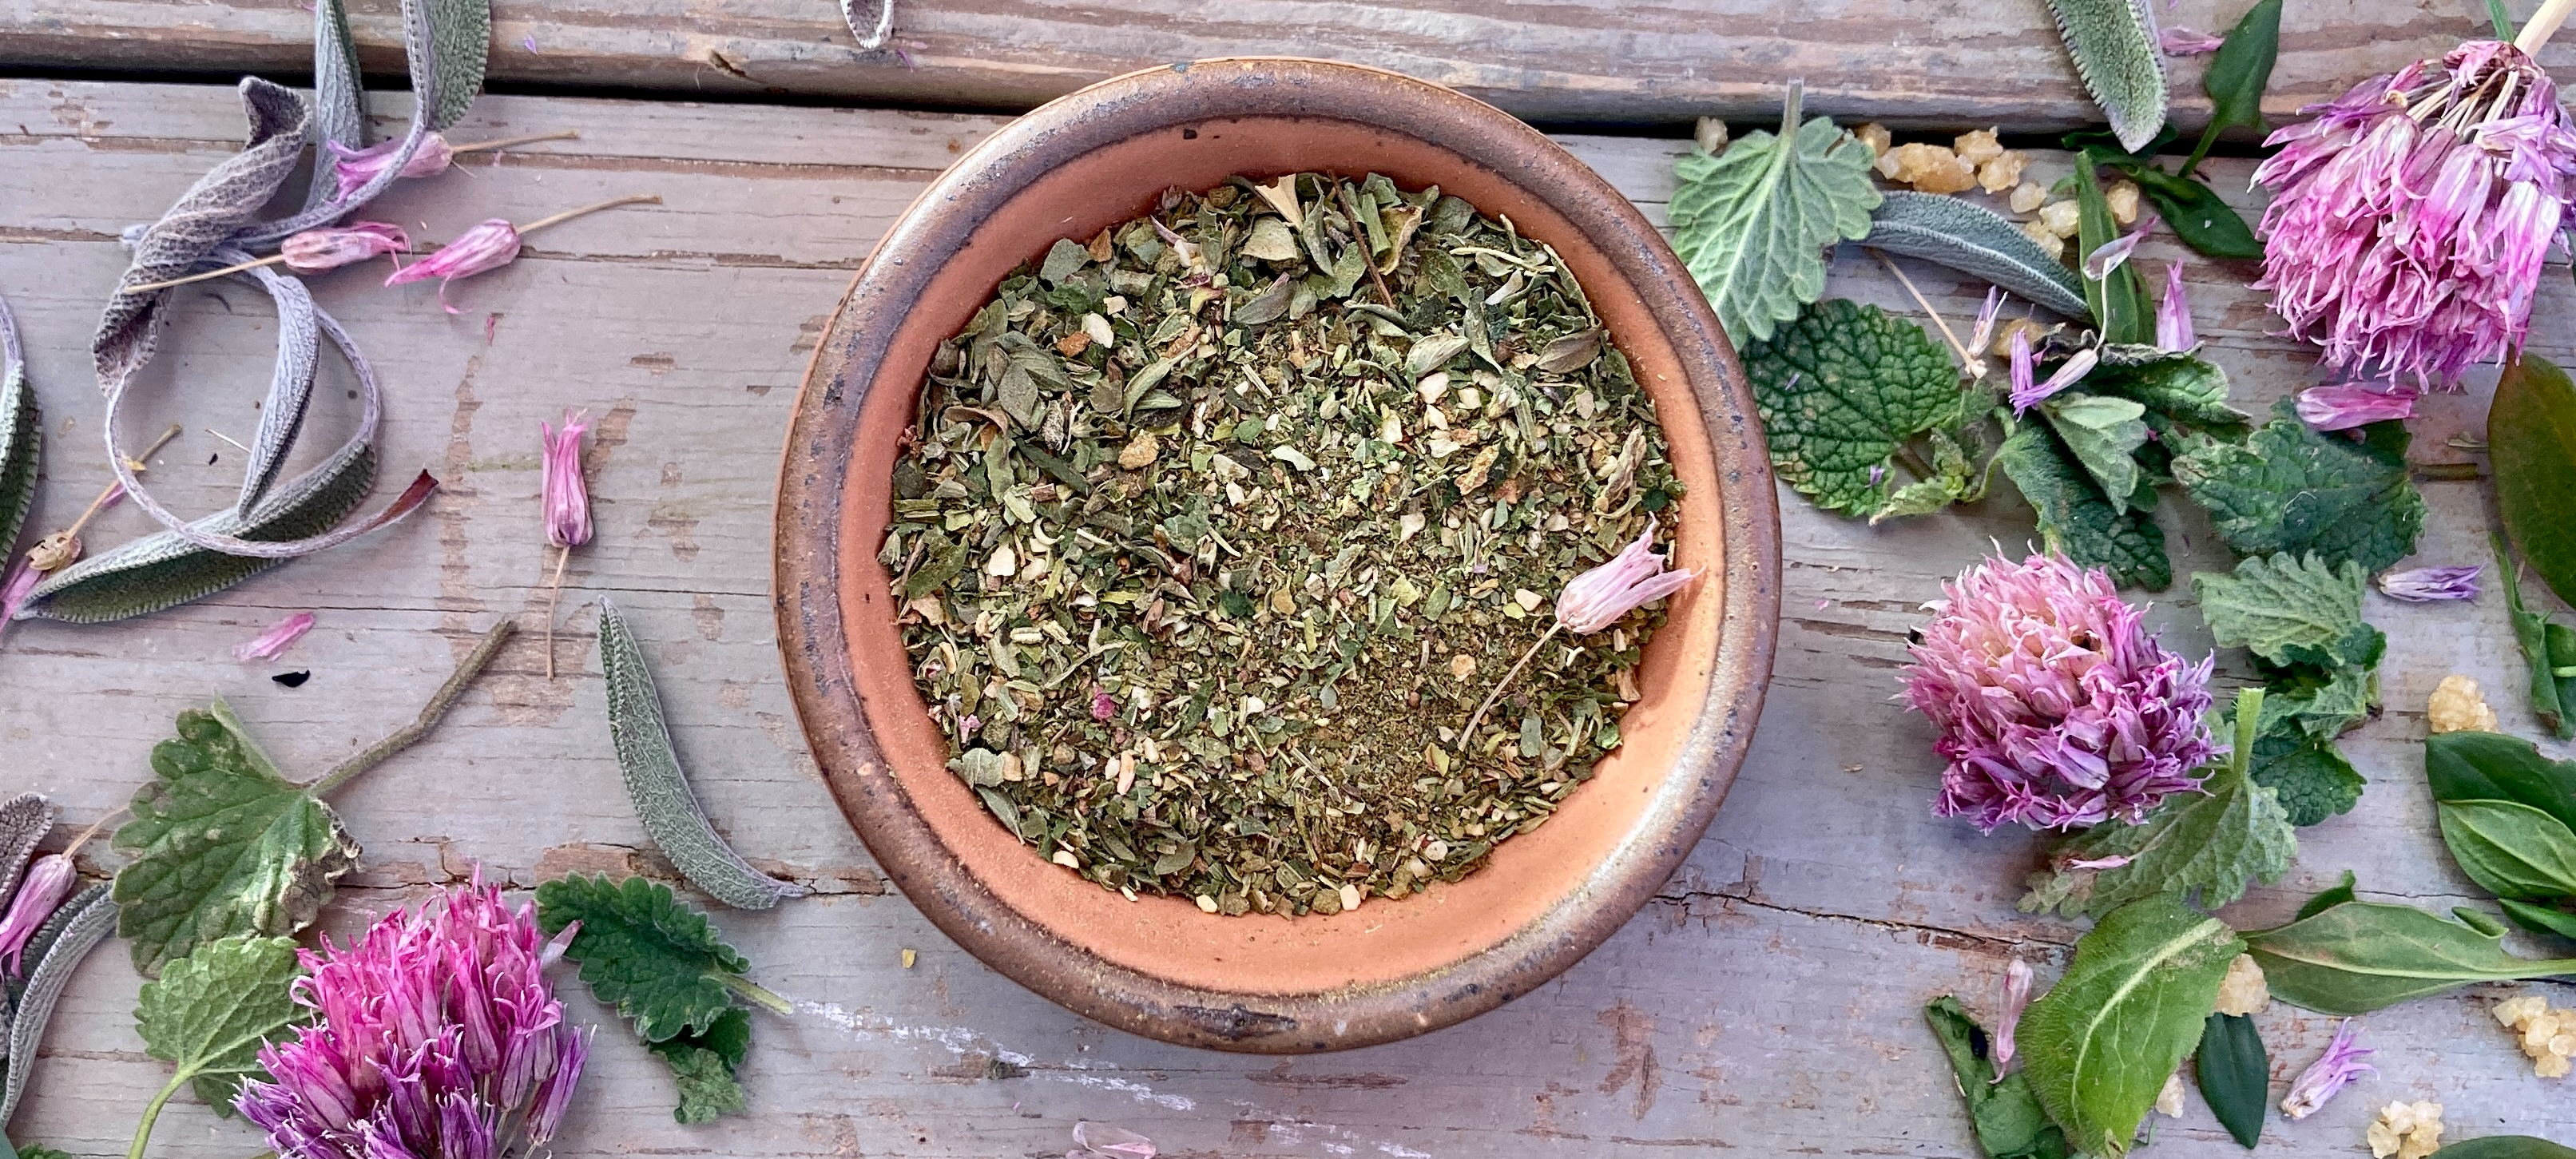 A bowl of Wild Green Goddess Seasoning from Well Seasoned Table on a wooden background with wild greens and chive blossoms around it.